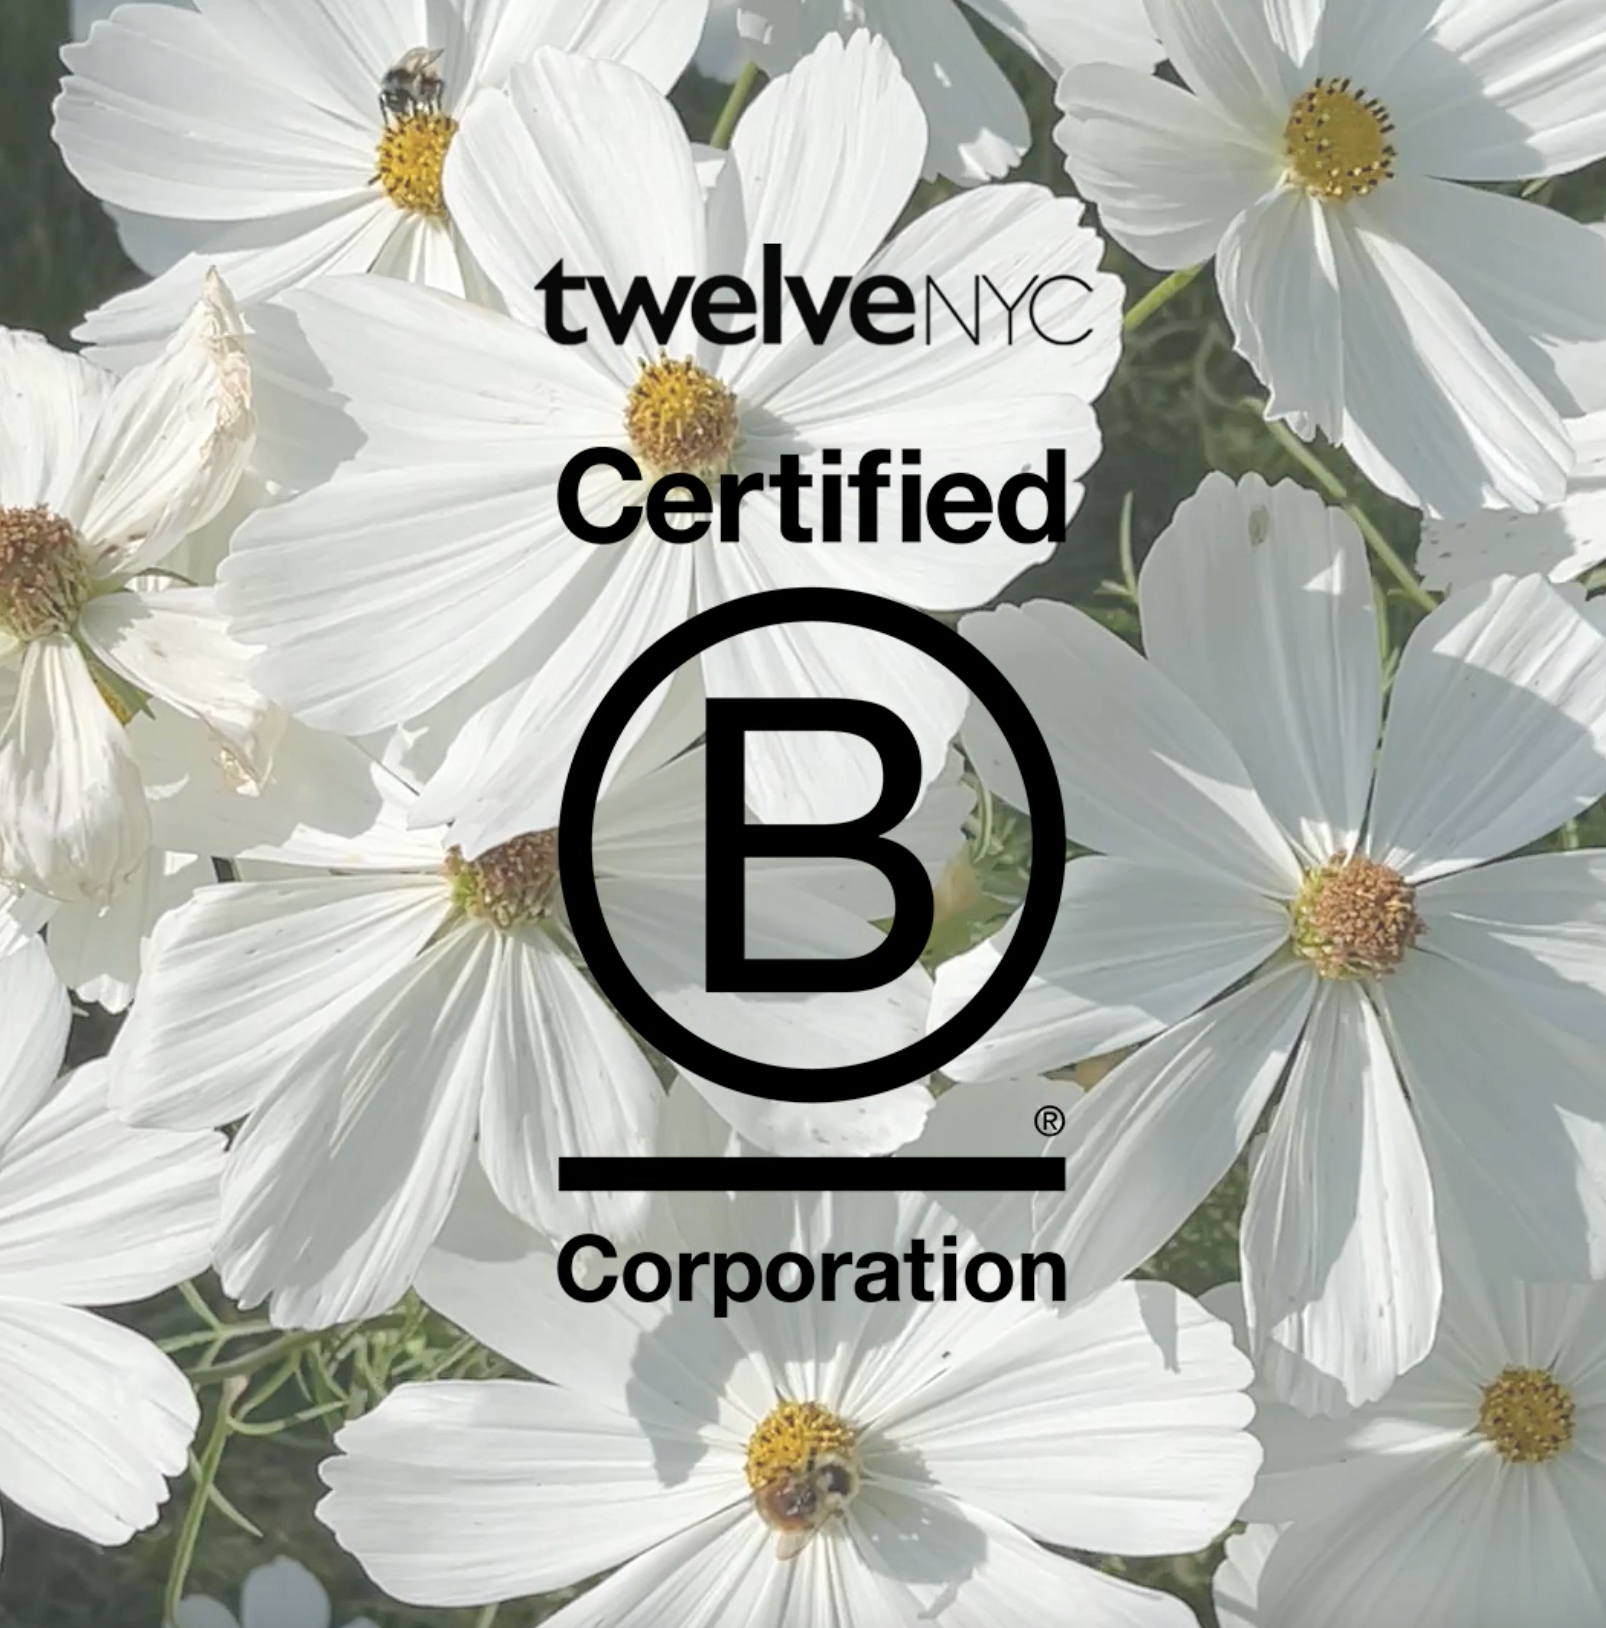 B Corp logo on flower bed